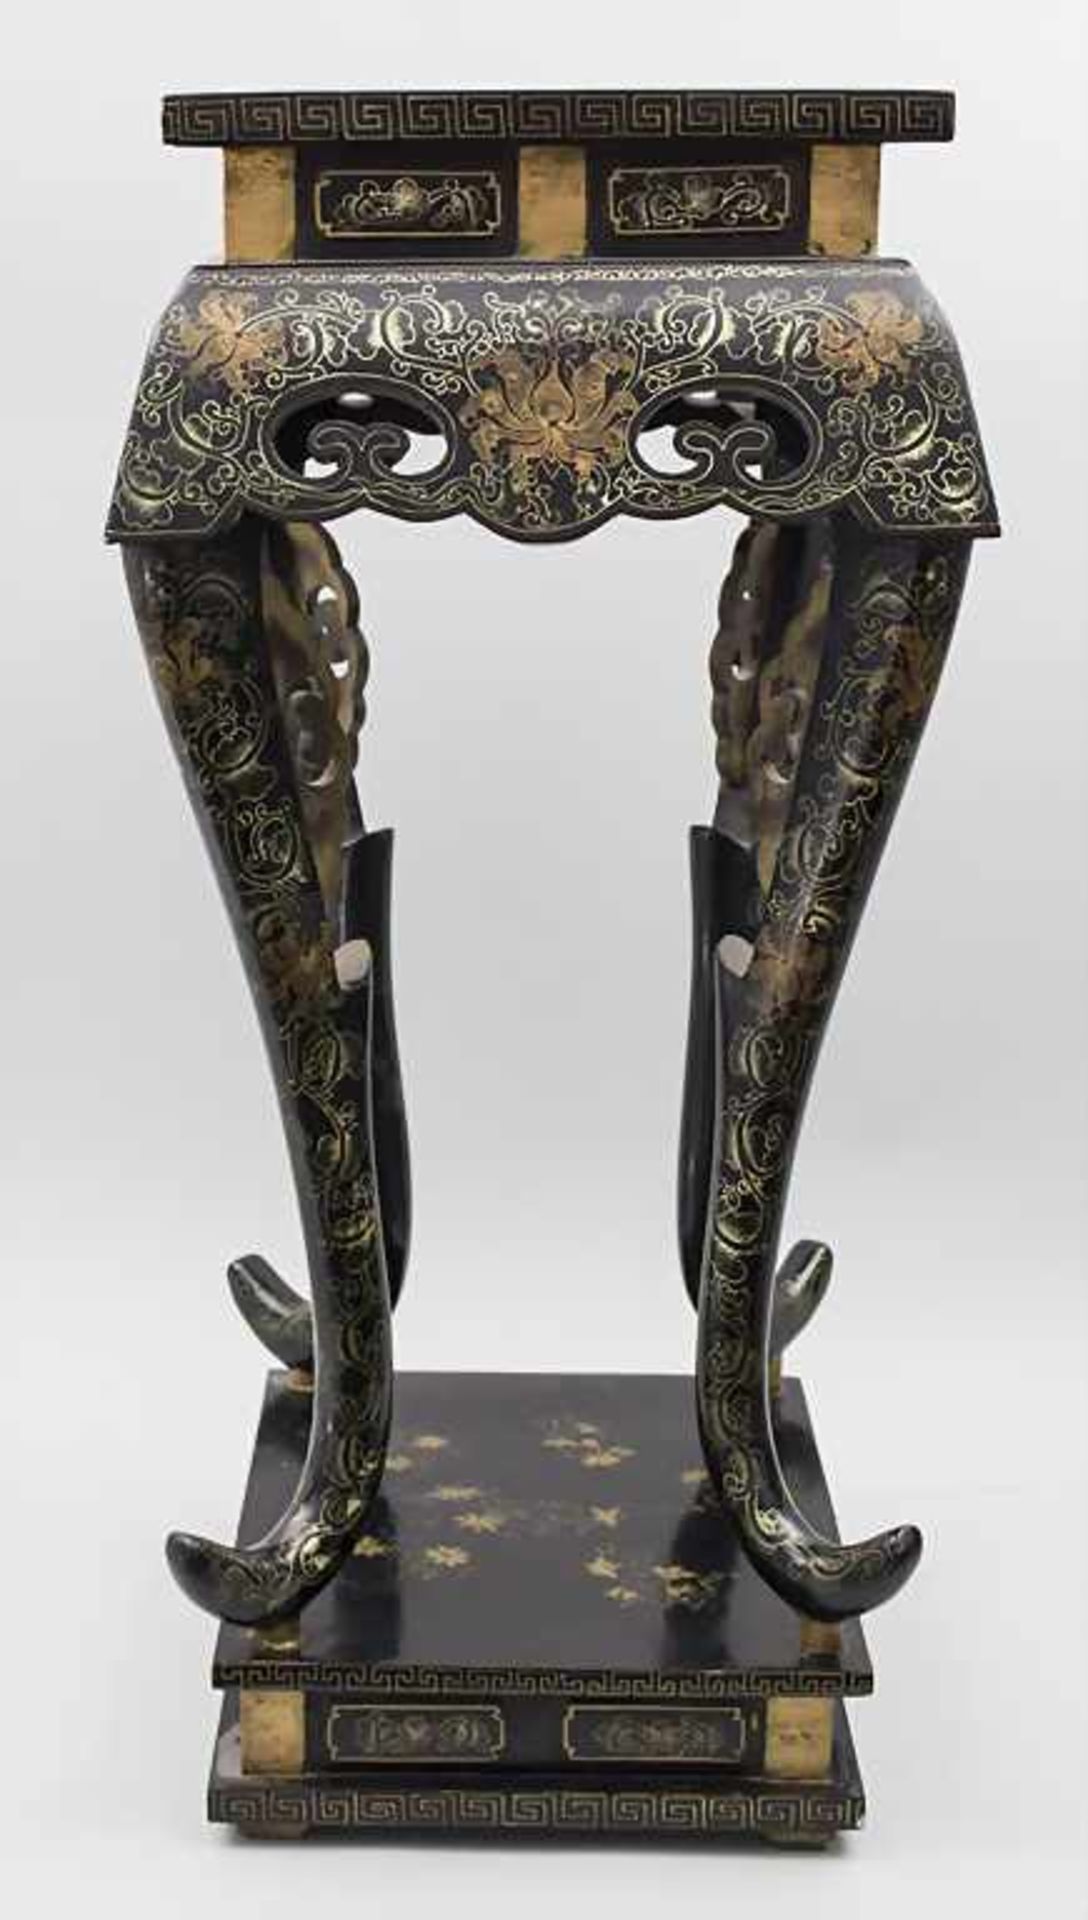 Lacktisch / A lacquer table, China, 20. Jh. - Image 5 of 8